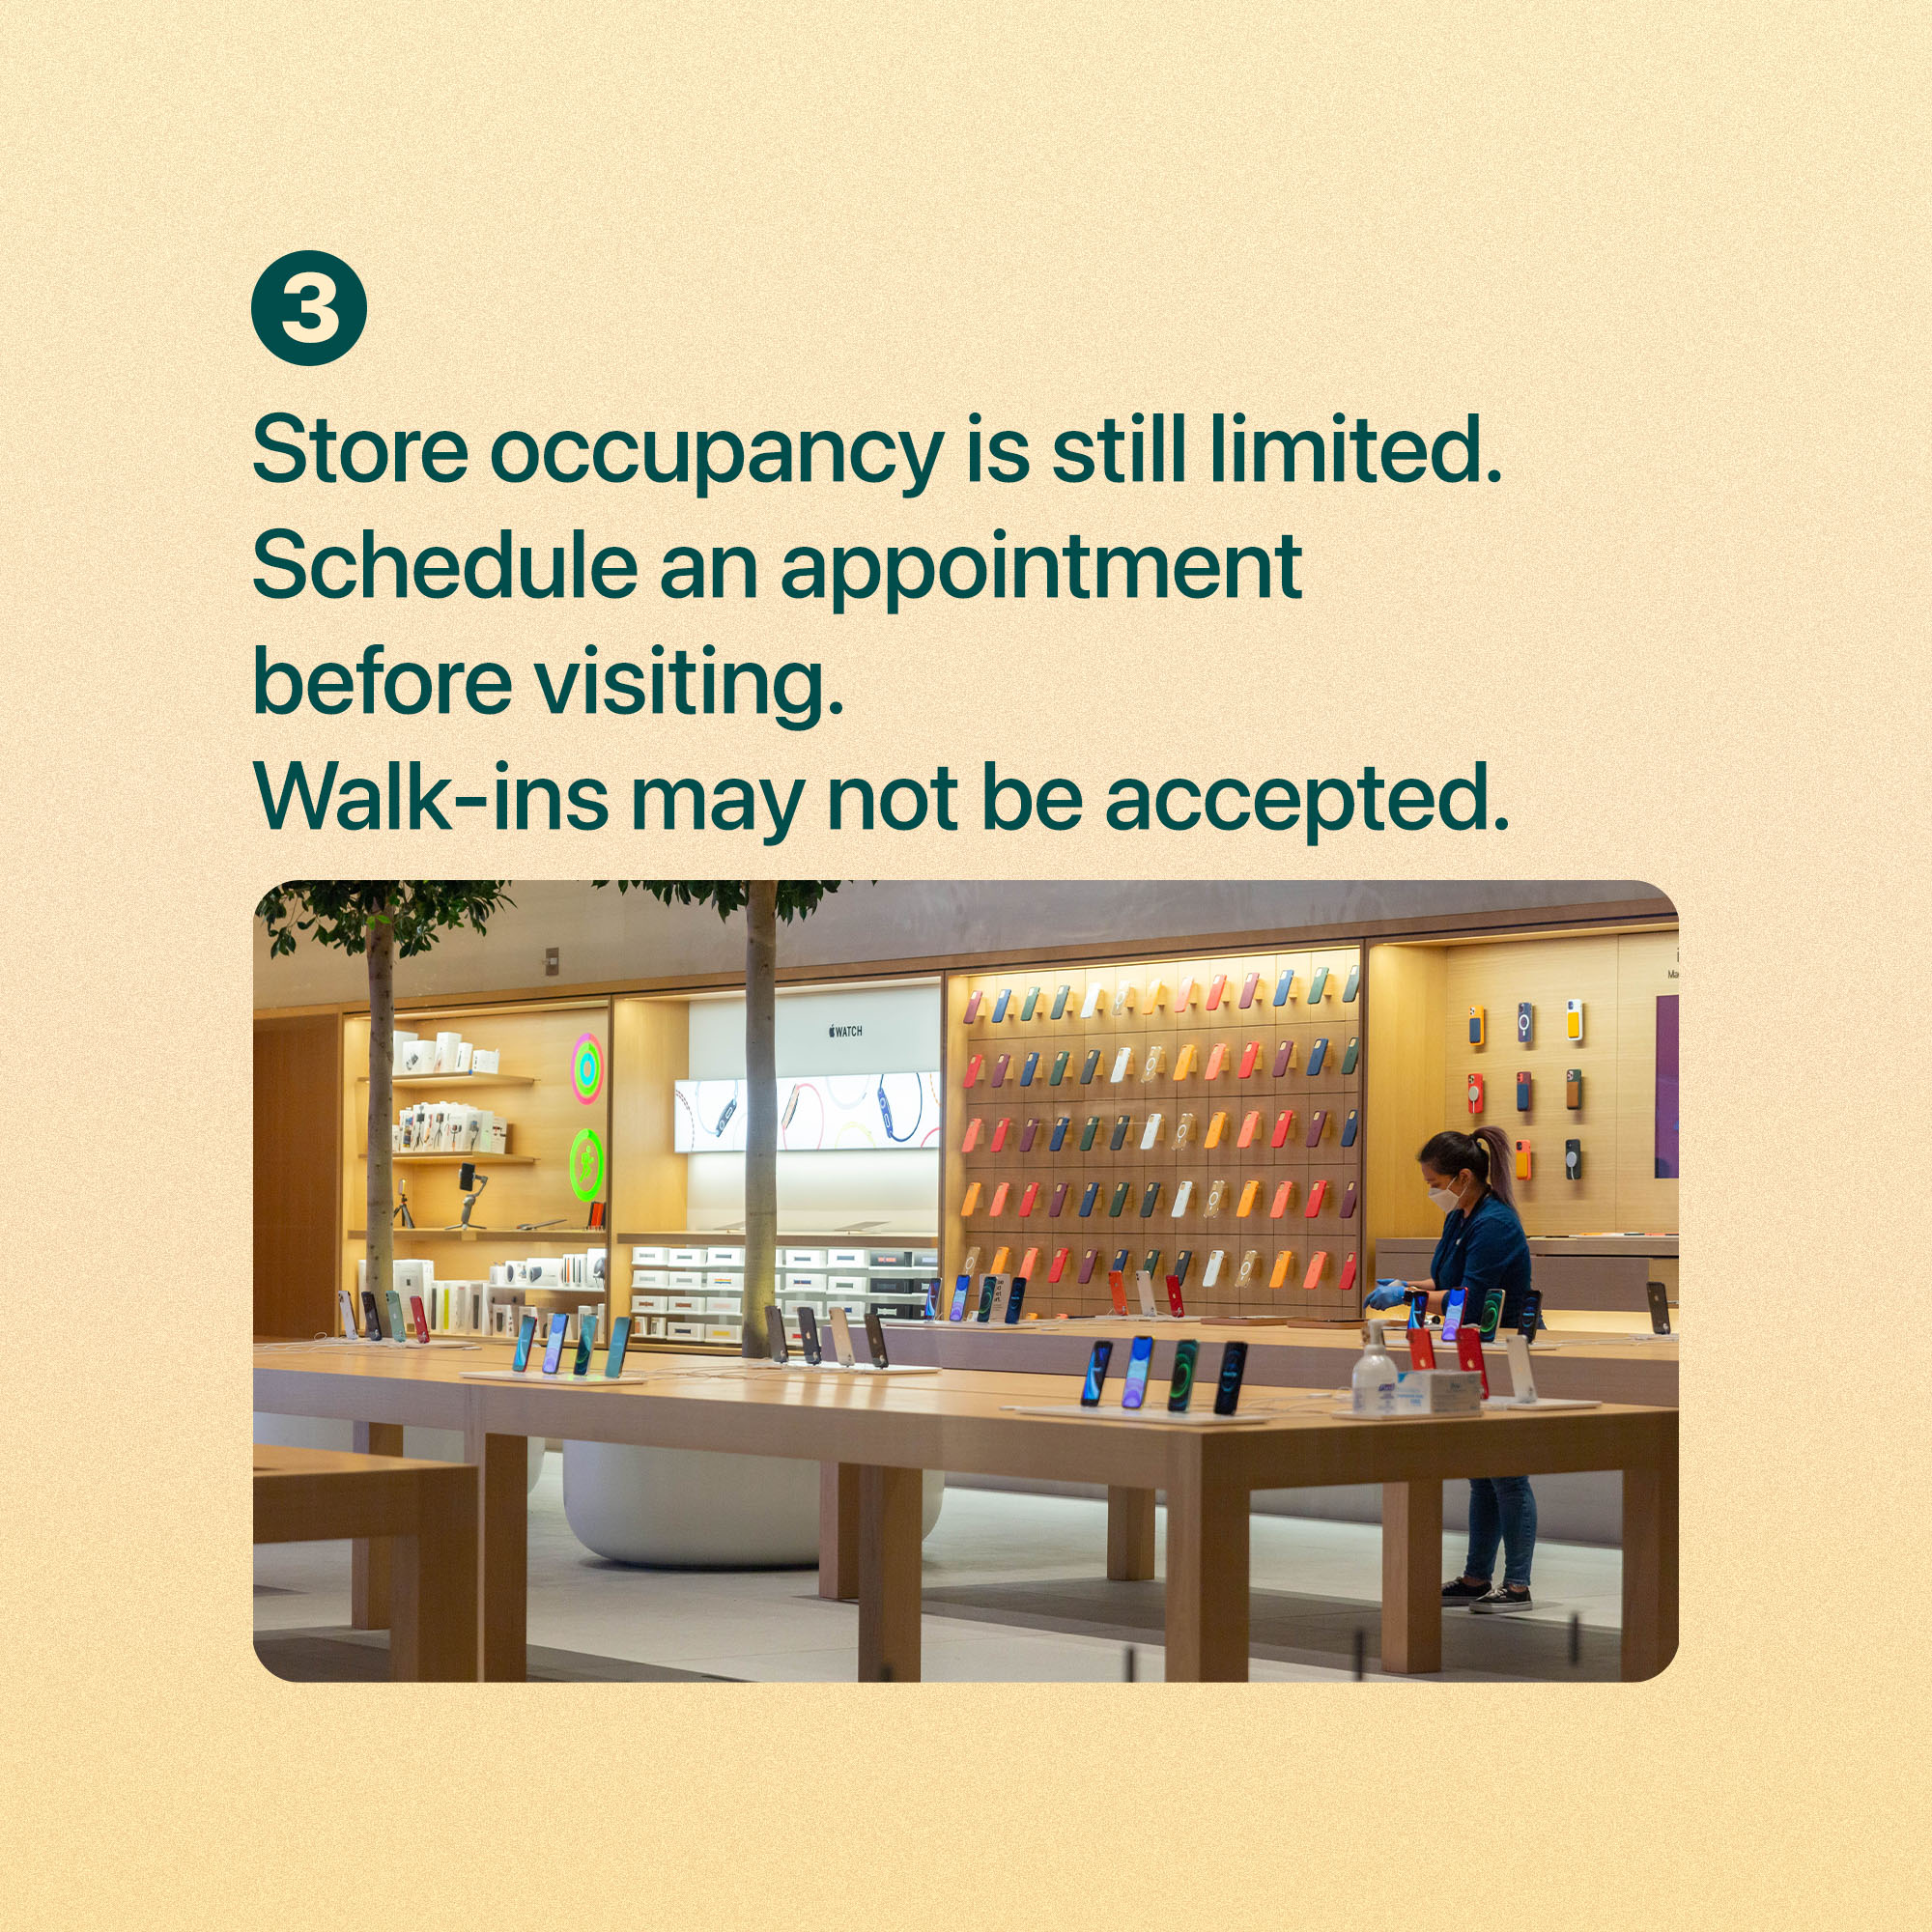 Store occupancy is still limited. Schedule an appointment before visiting. Walk-ins may not be accepted.